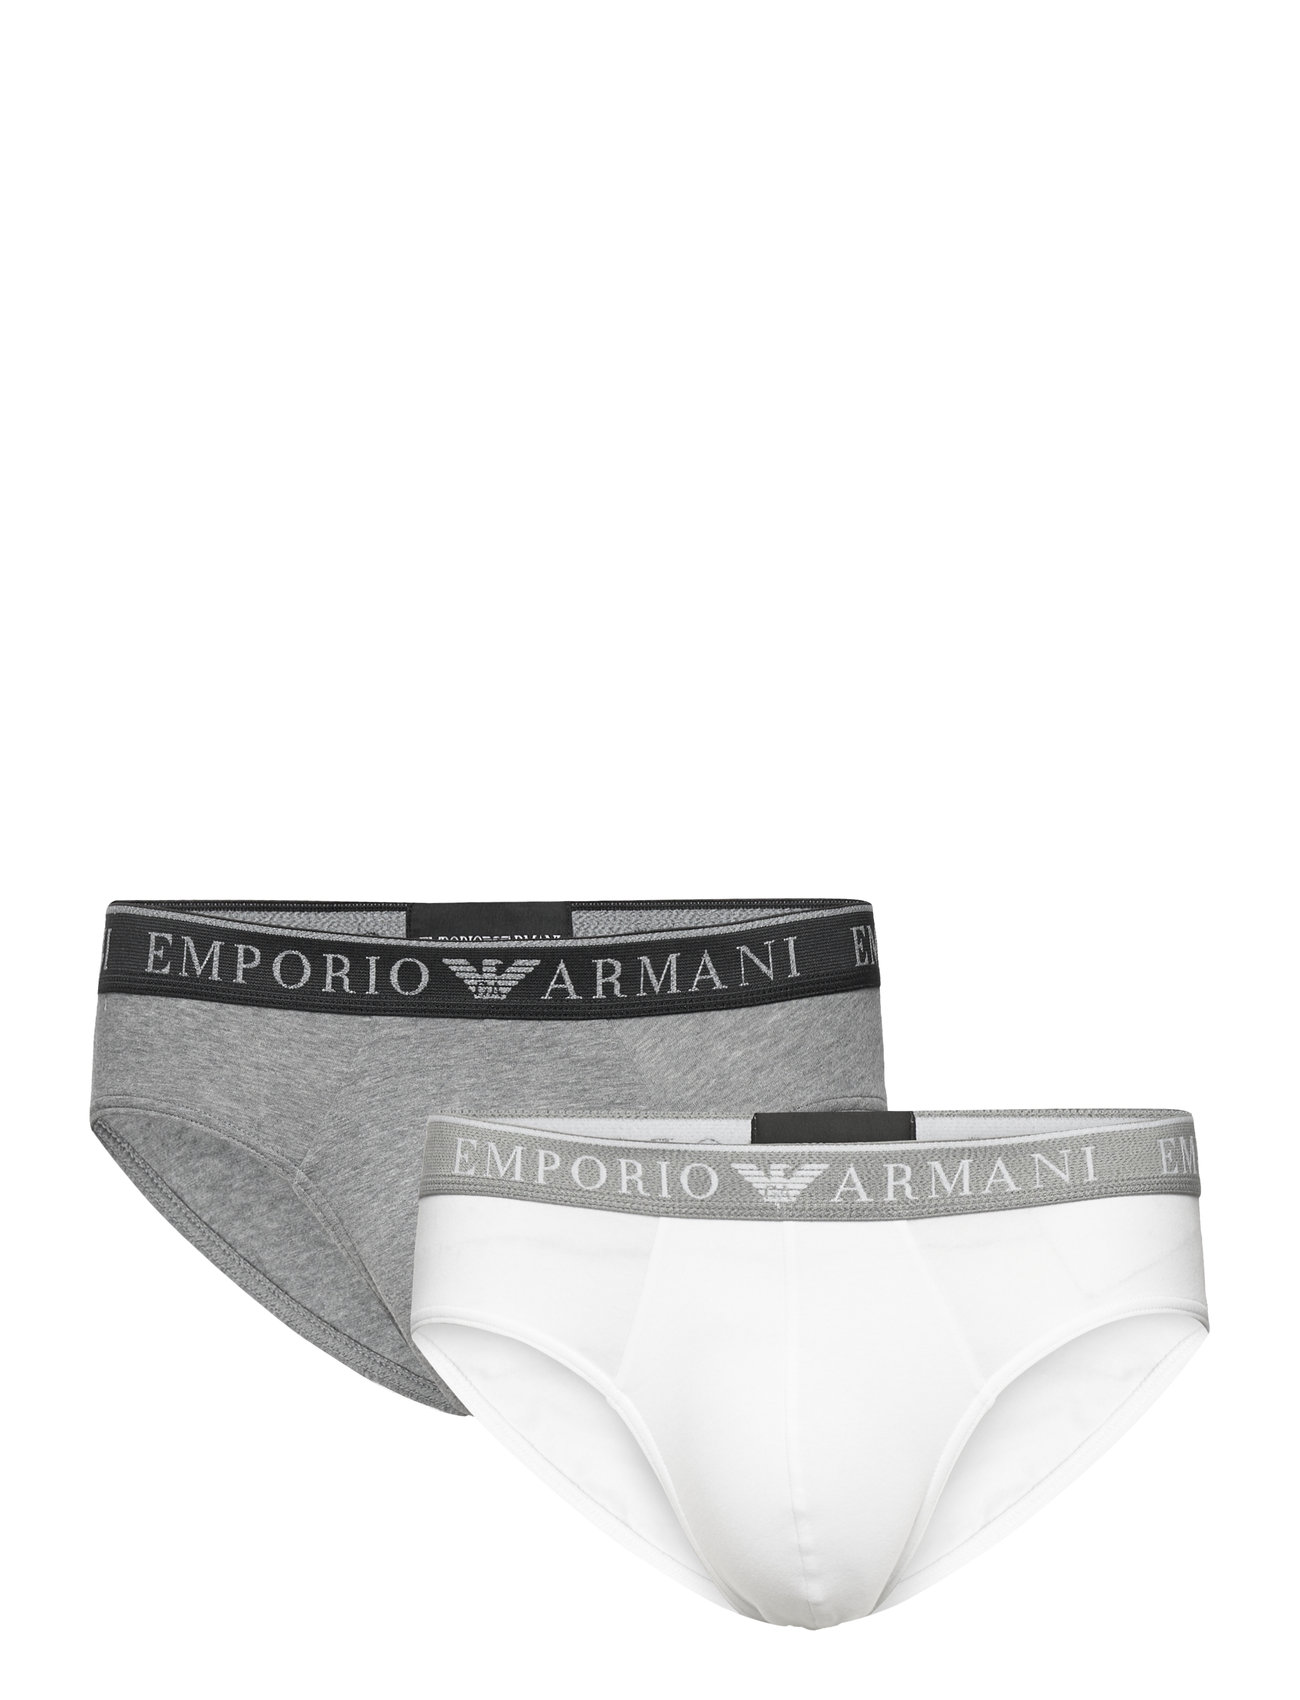 Emporio Armani Knit Trunk 2-Pack Charcoal/Lime 111210-4P717-10843